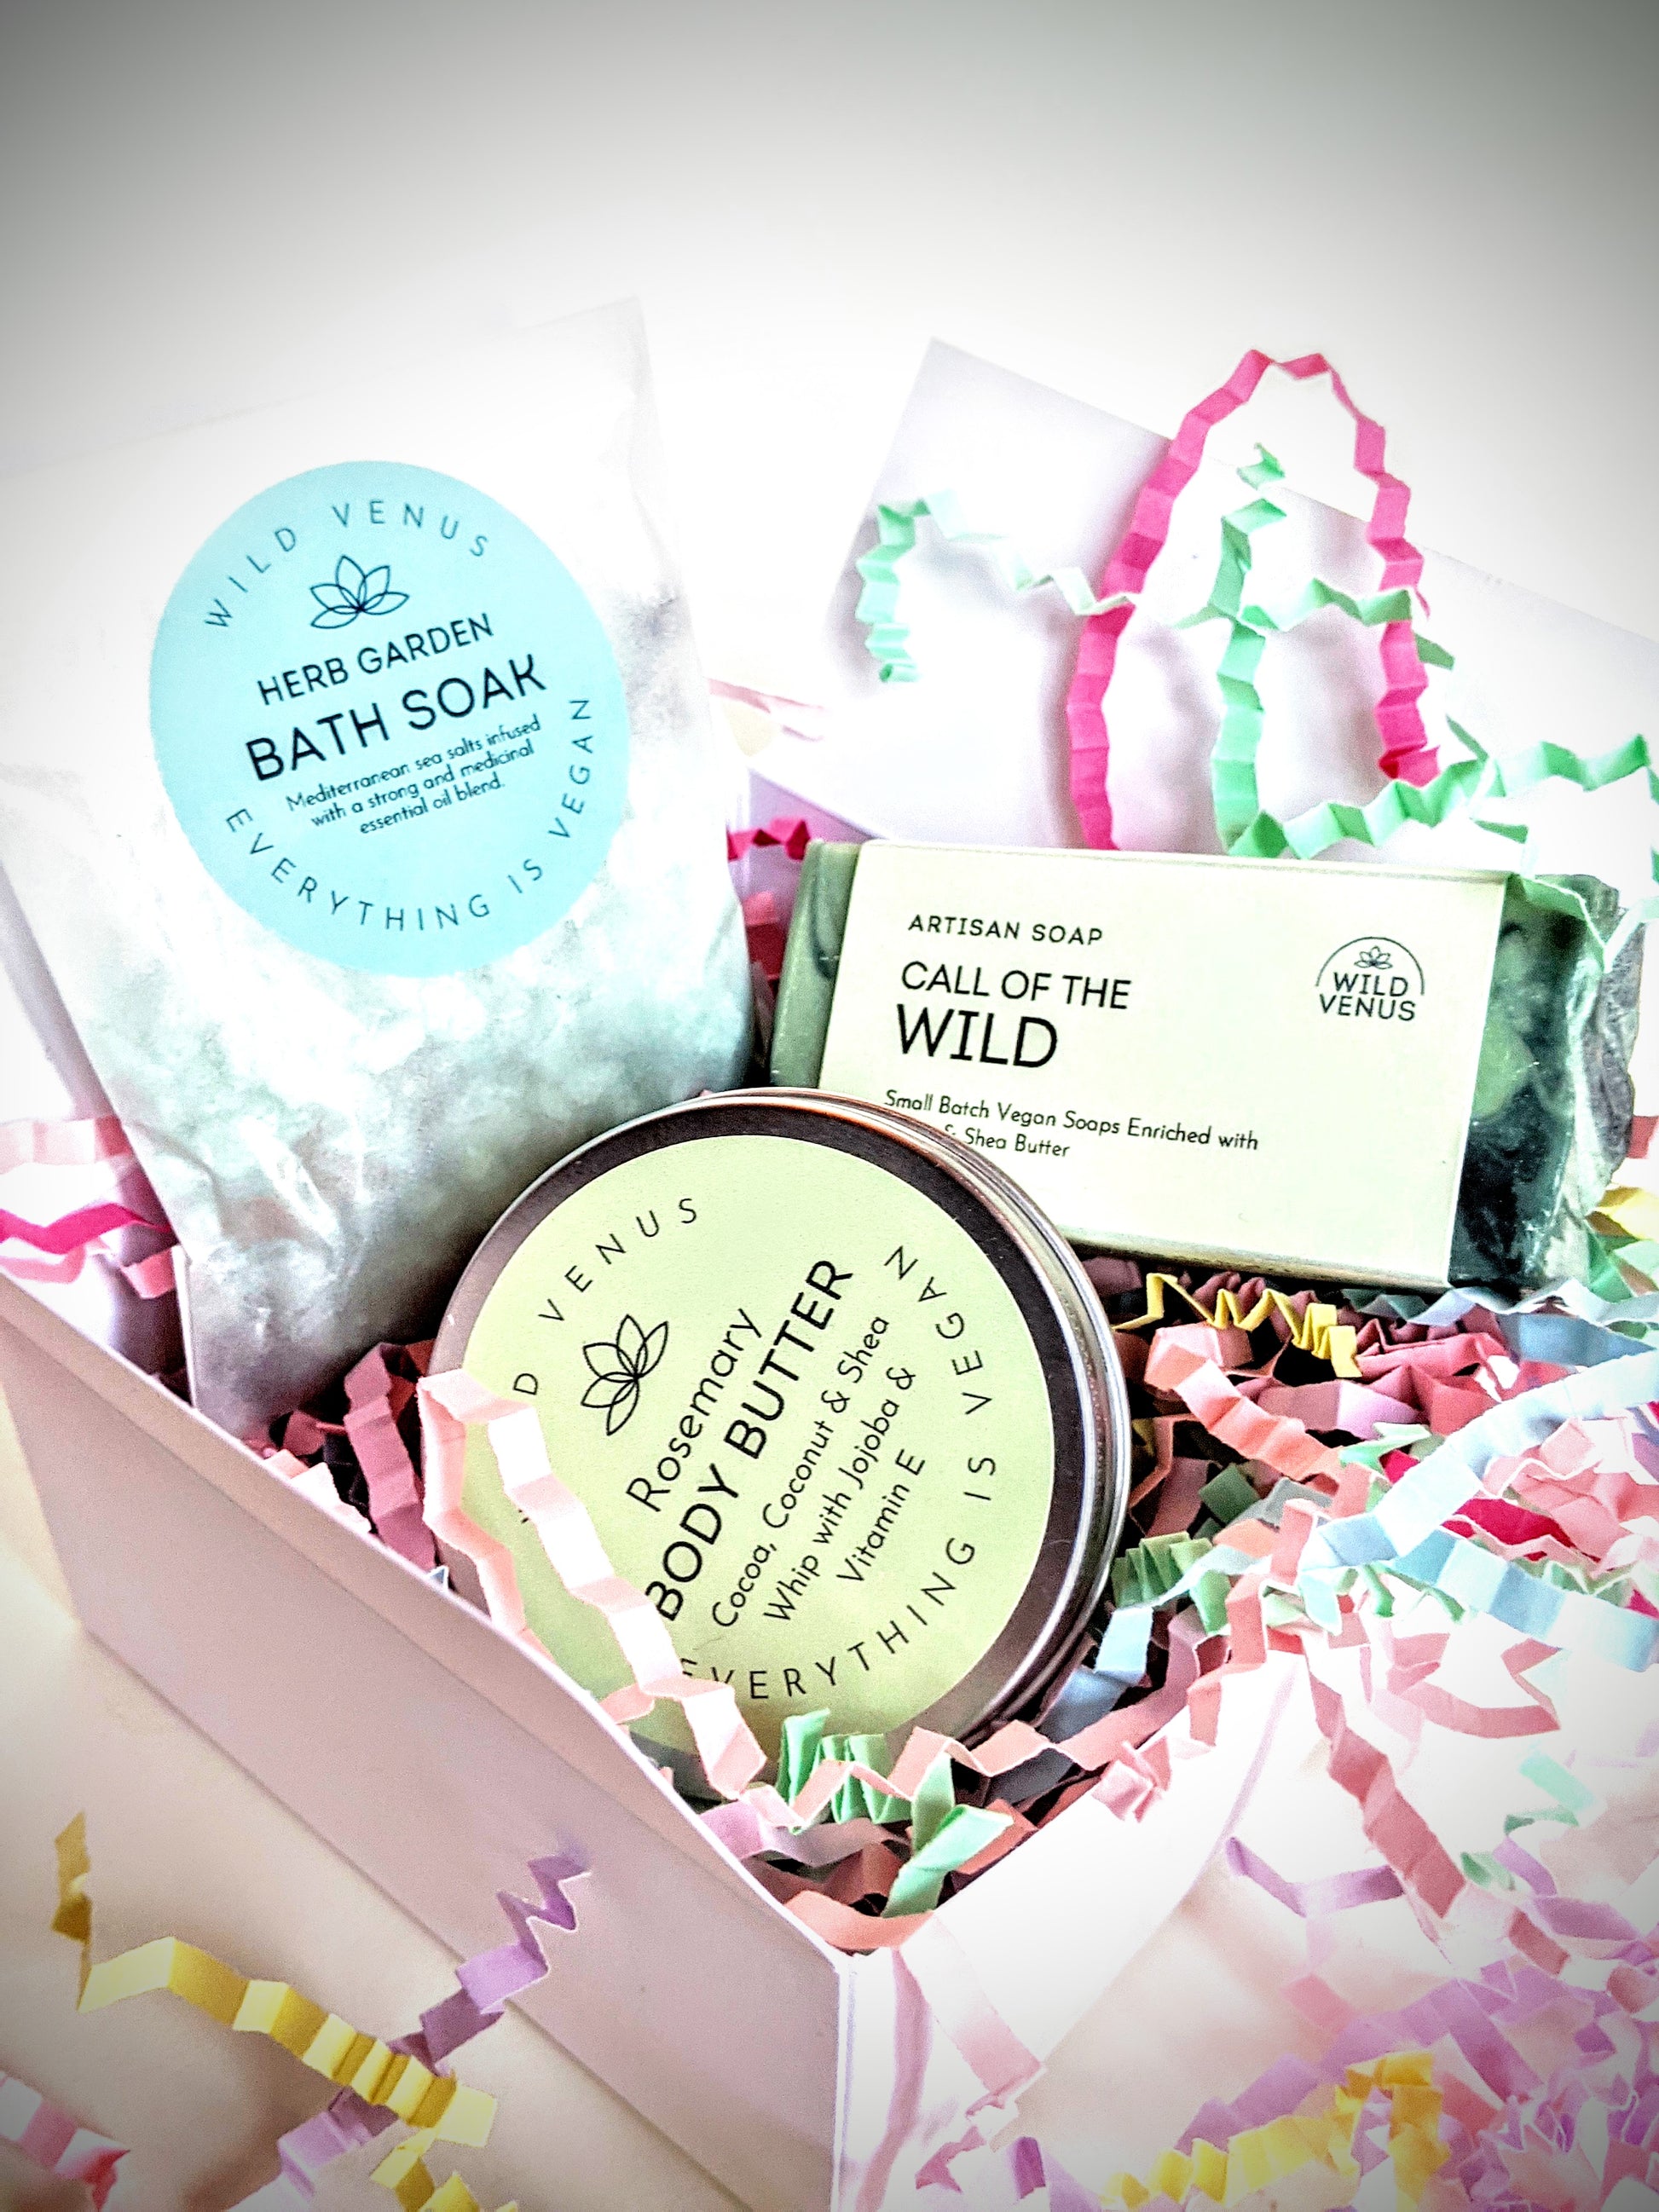 An open box of the rosemary fields body butter gift.